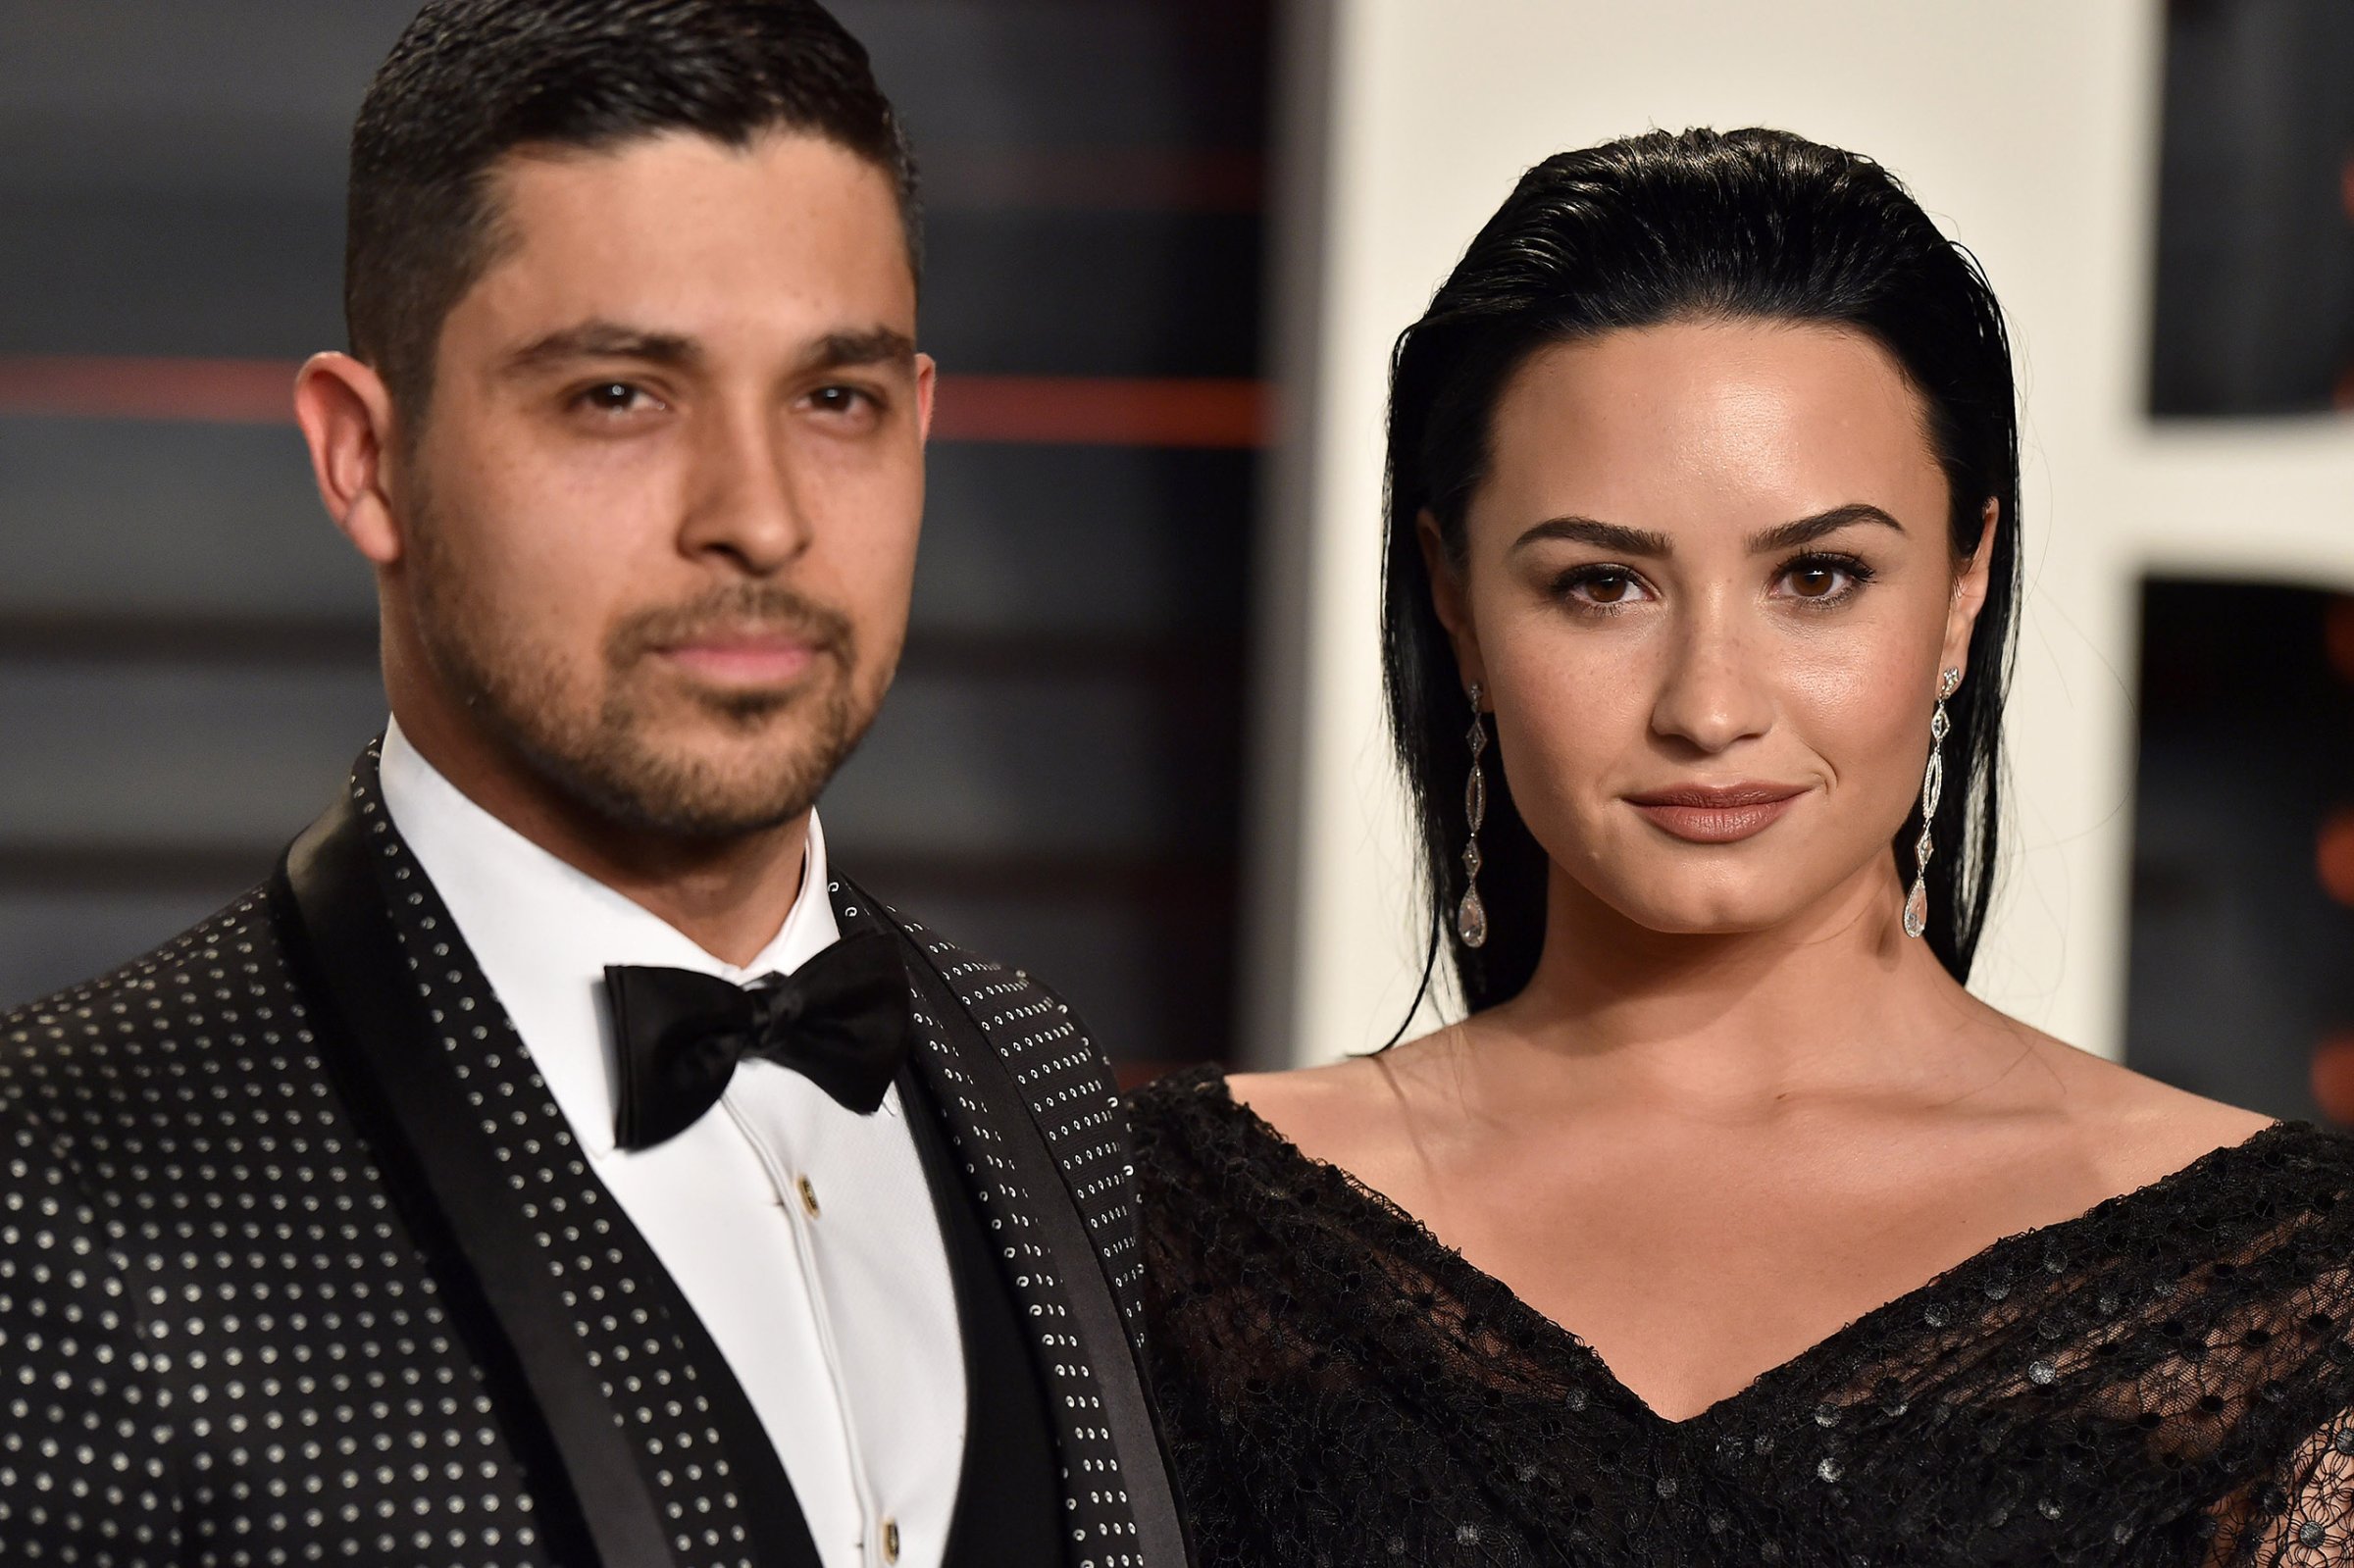 Actor Wilmer Valderrama and singer Demi Lovato arrive at the 2016 Vanity Fair Oscar Party in Beverly Hills, Calif. on Feb. 28, 2016.